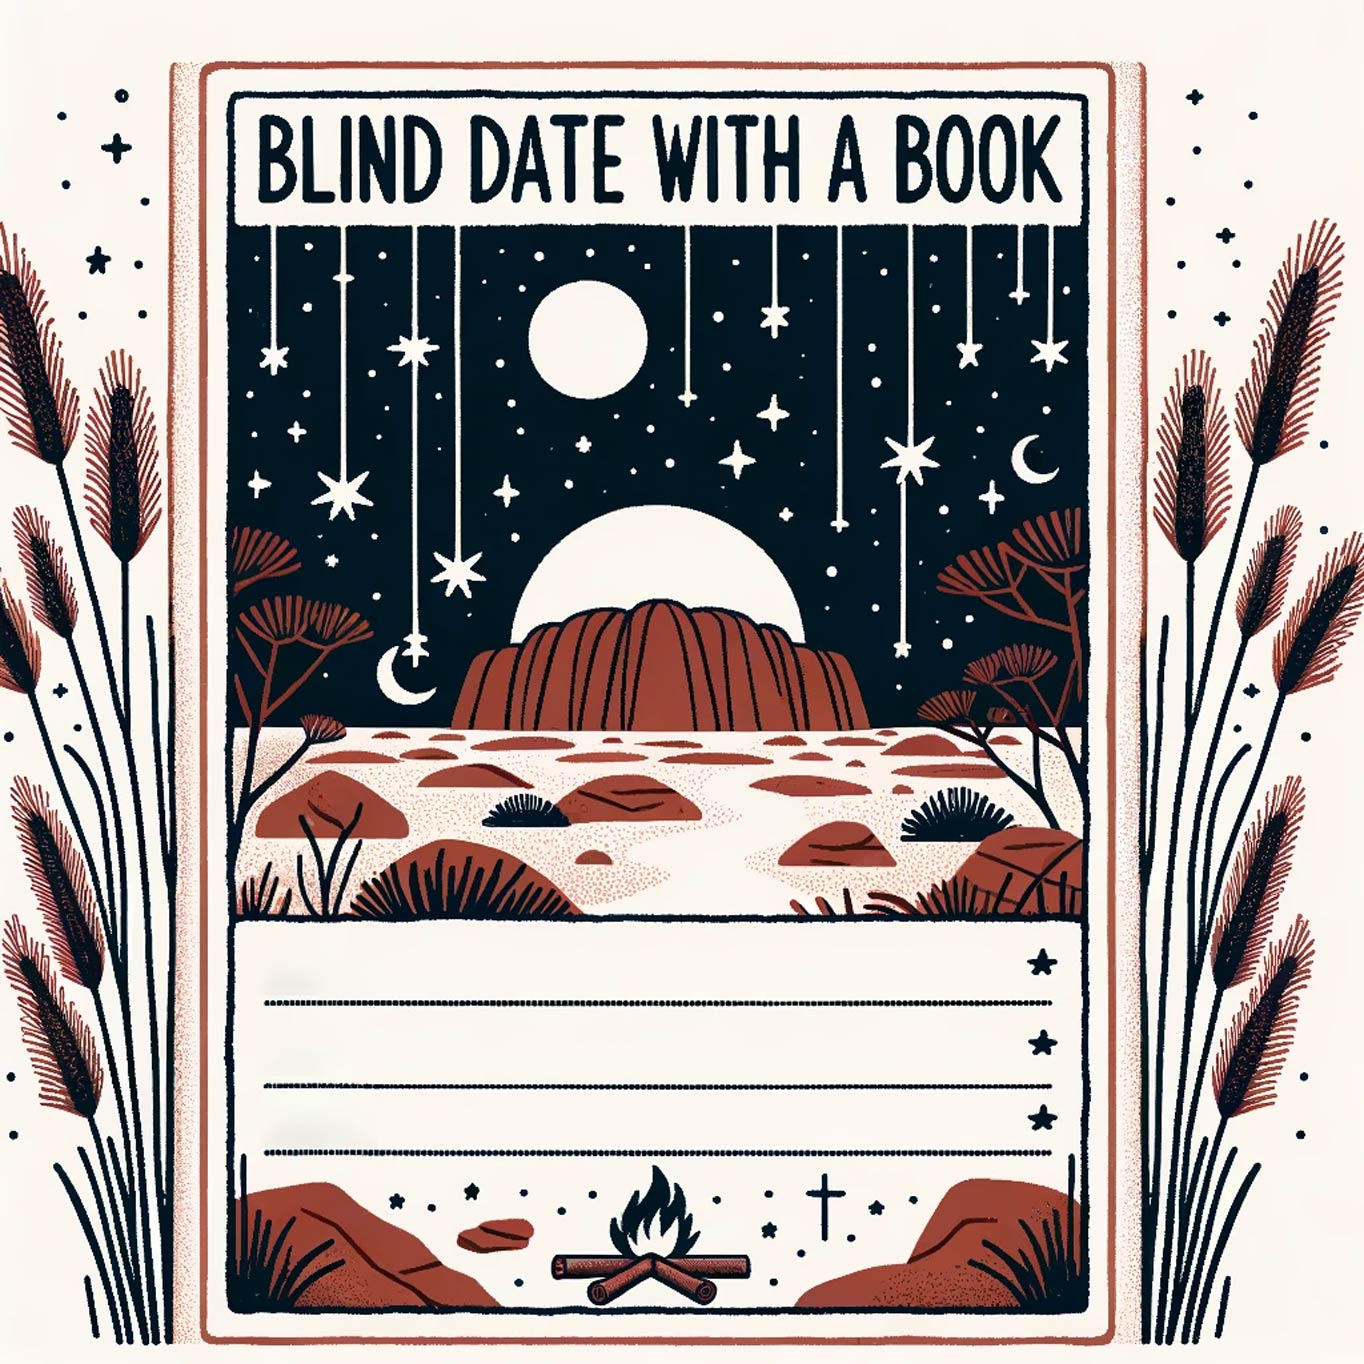 Blind Date With A Book Free Template - Australia